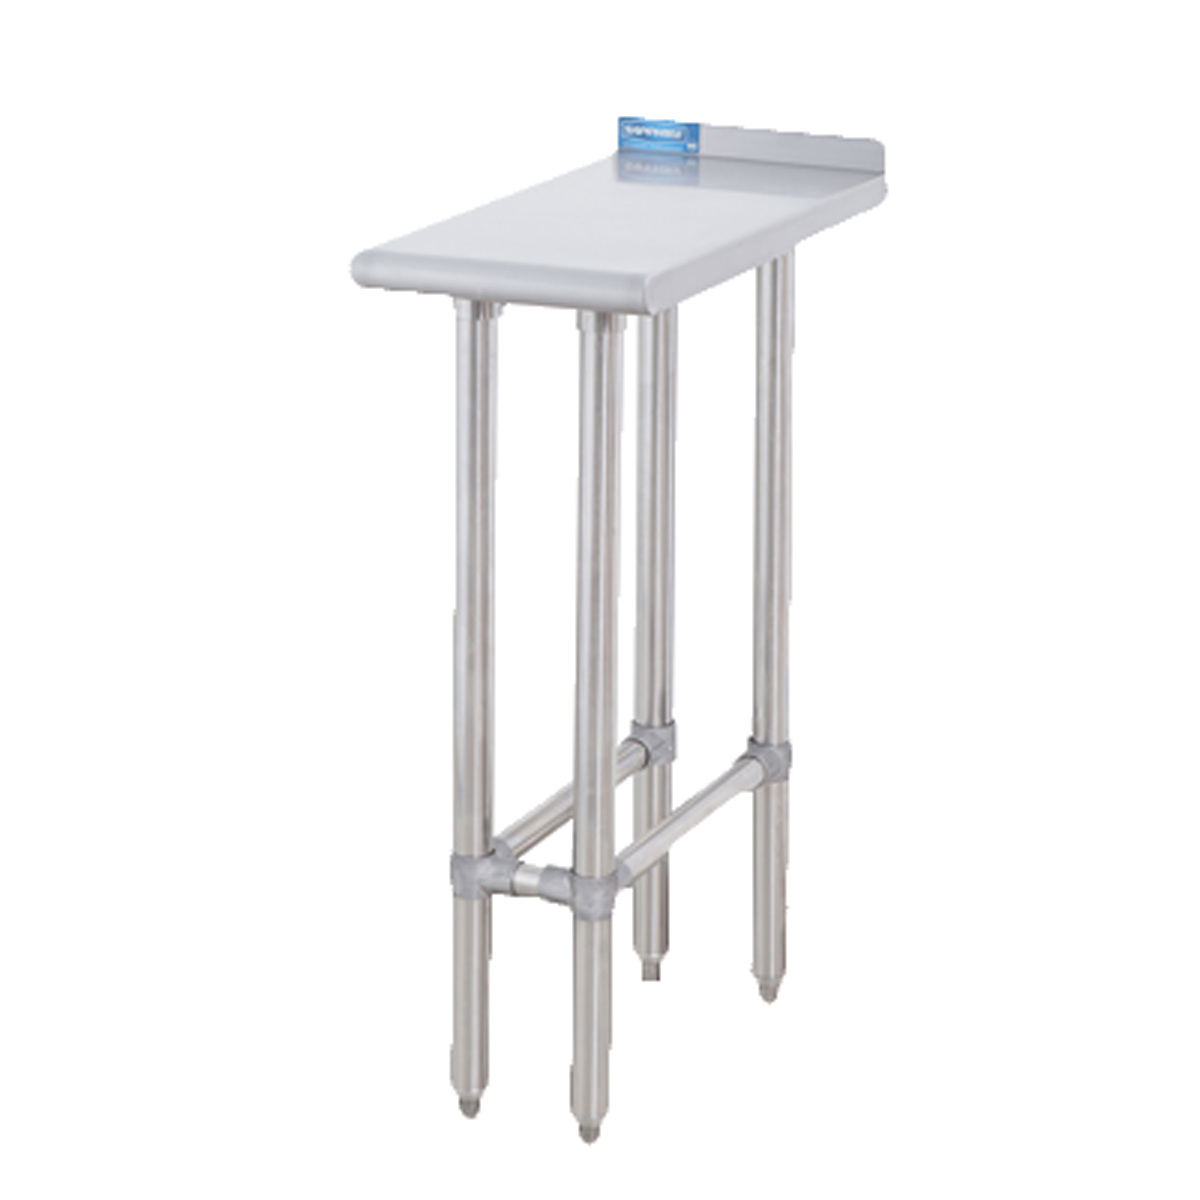 Sapphire SMEFT-3615 Equipment Filler Table with Stainless Steel Top, 15"W x 36"D